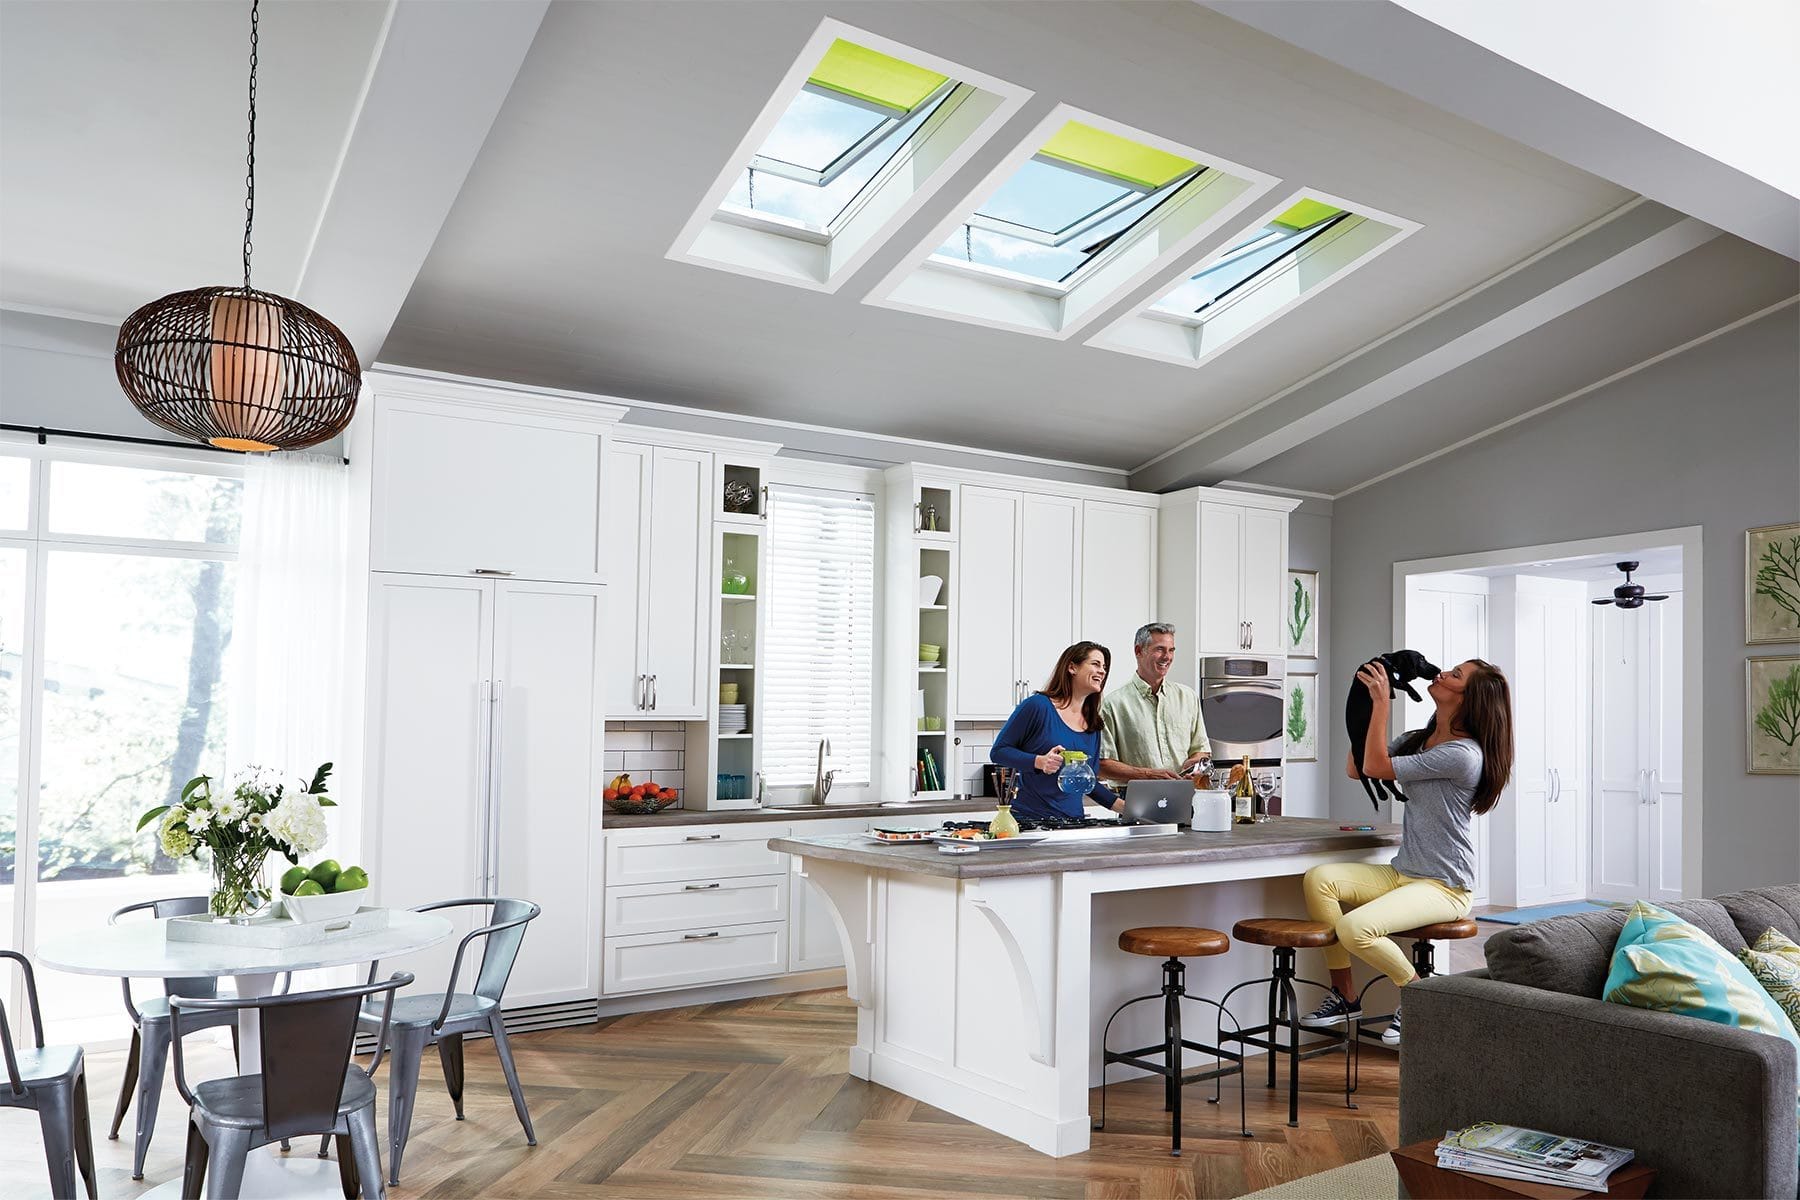 Unique Skylight In Kitchen for Large Space